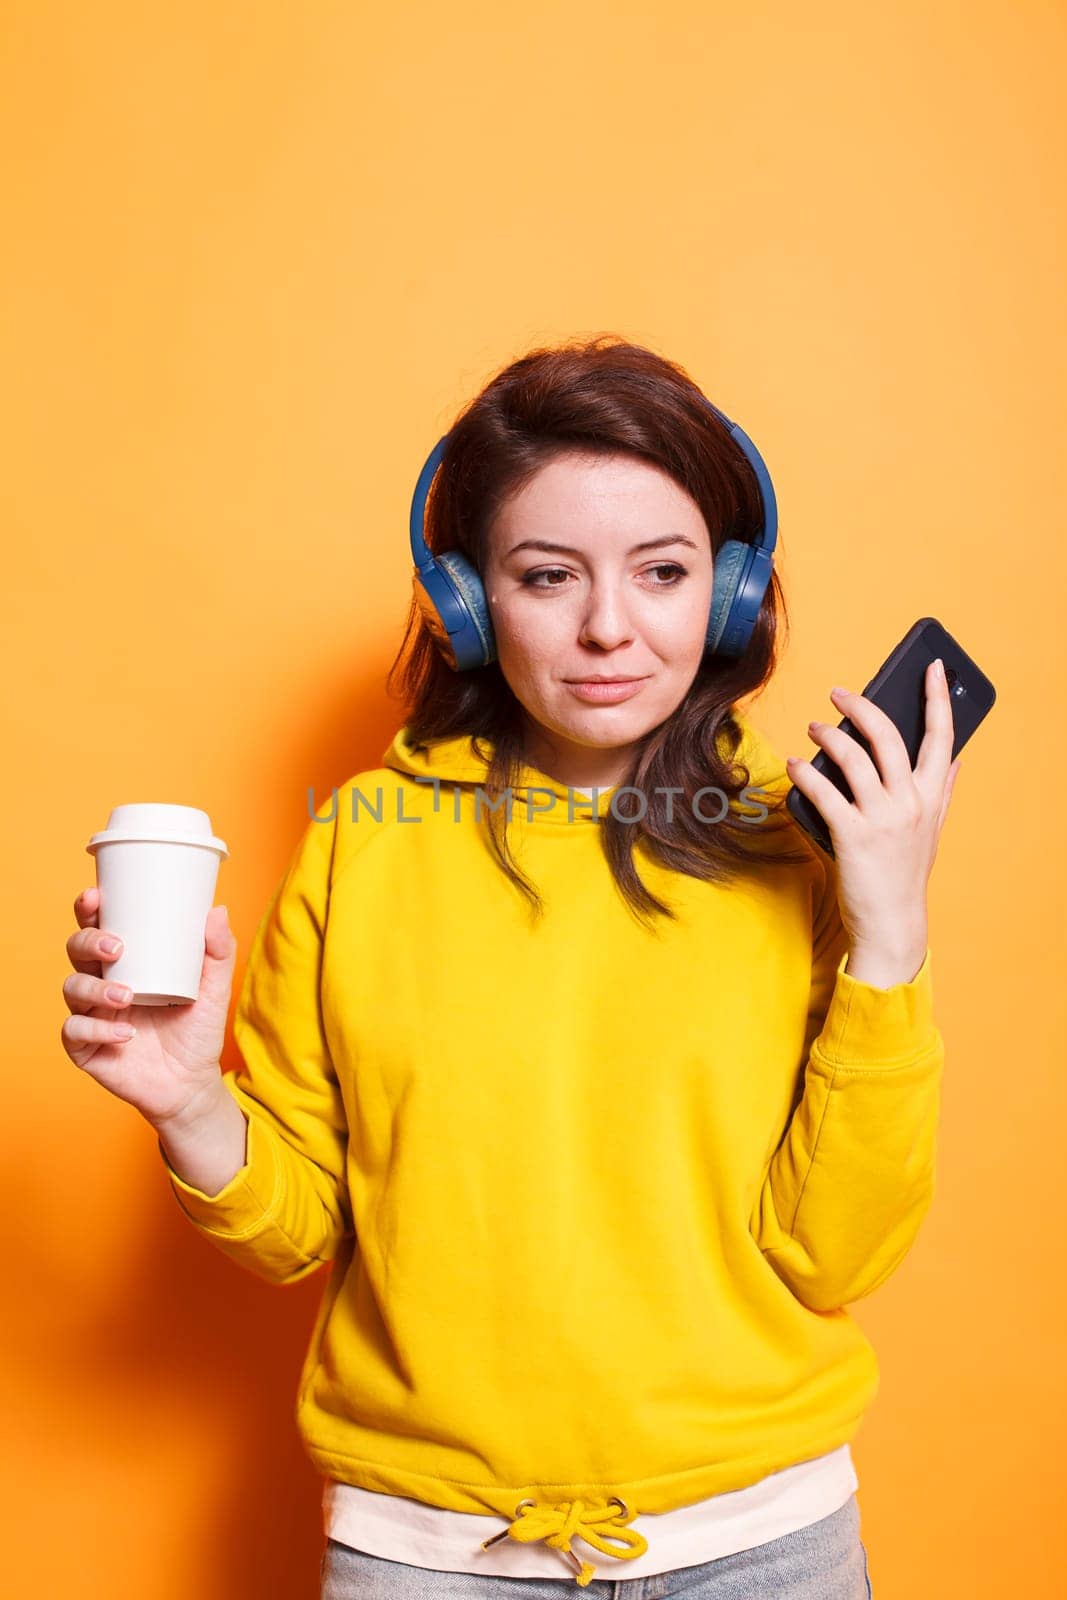 Female adult grasps phone and coffee cup by DCStudio